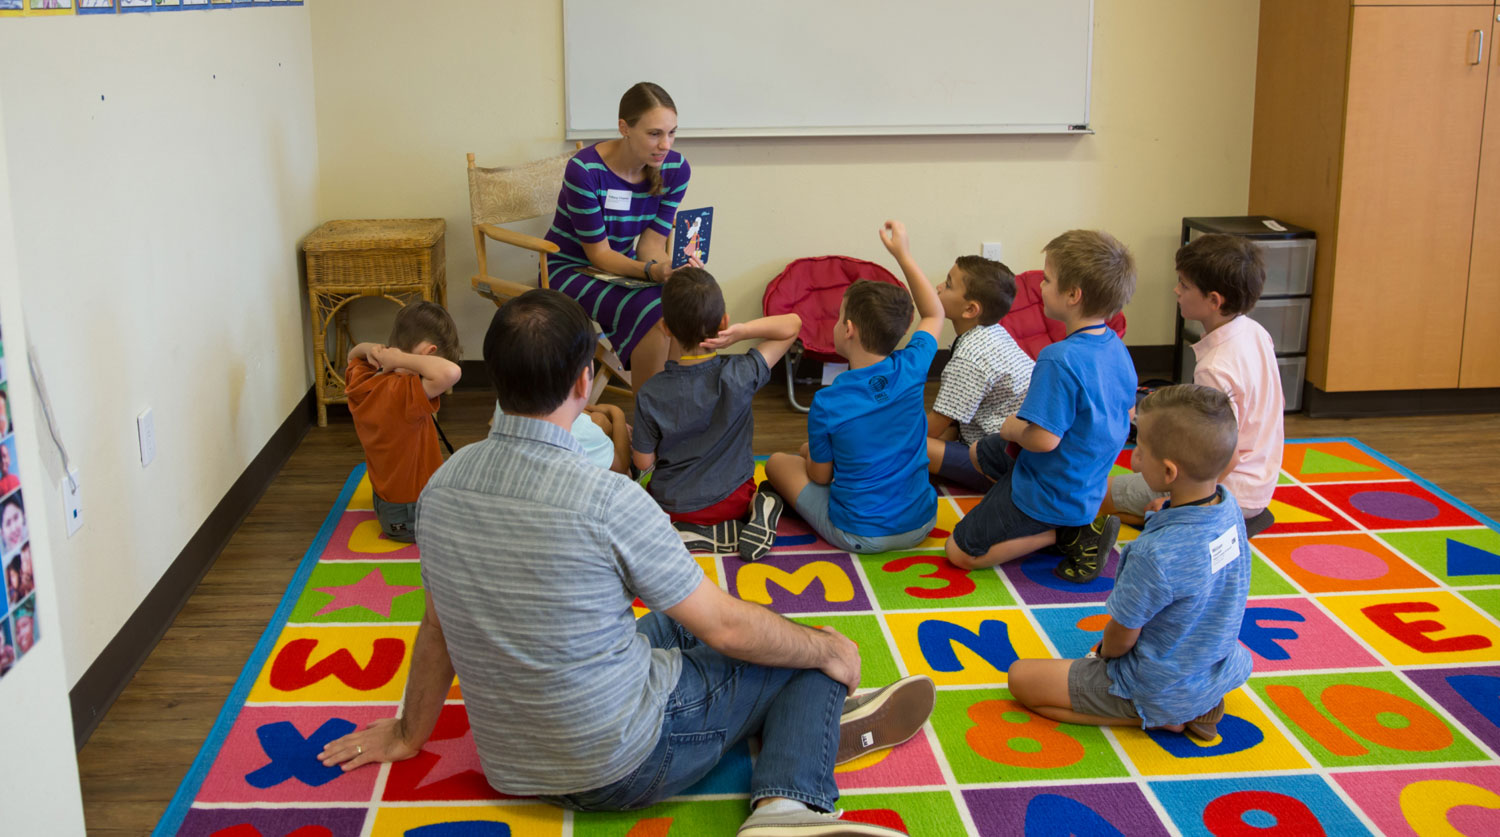 An adult talking to a group of children in a classroom